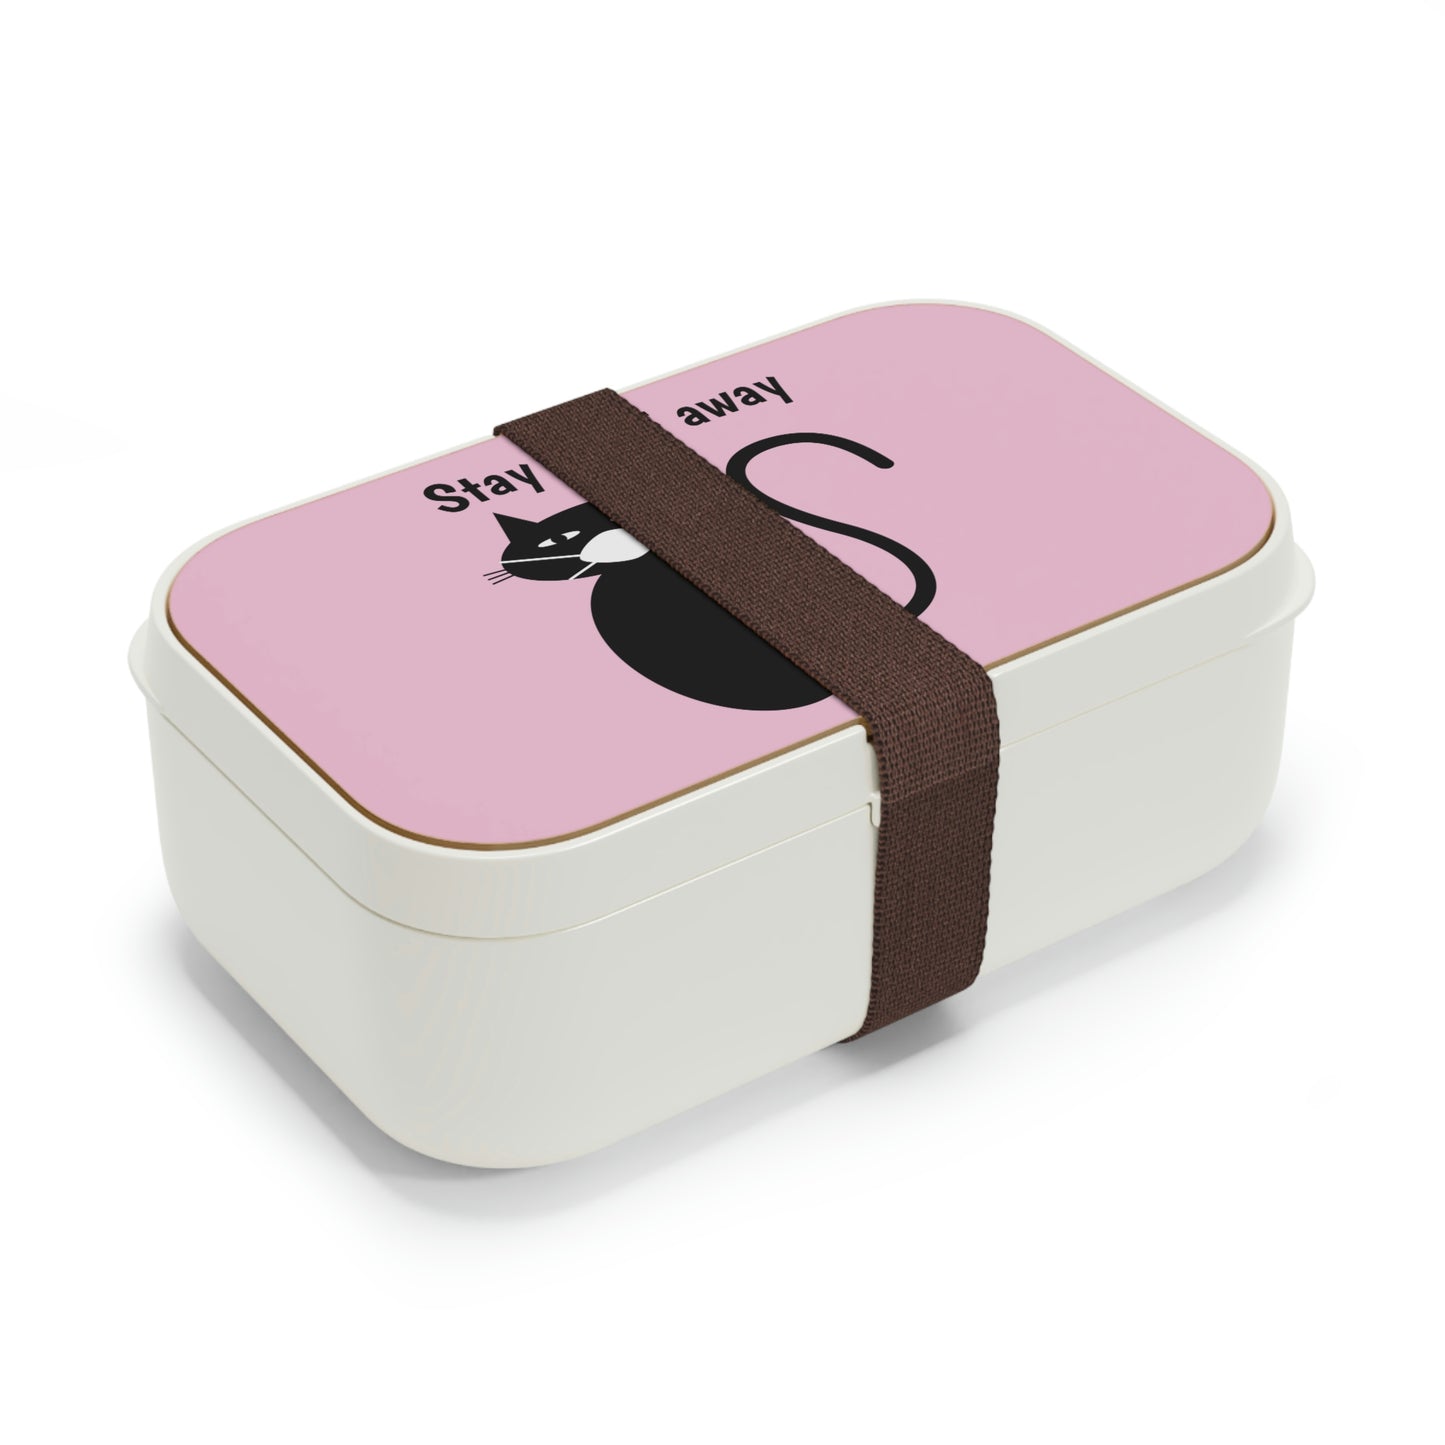 Black cat Stay the F away pink Bento Lunch Box